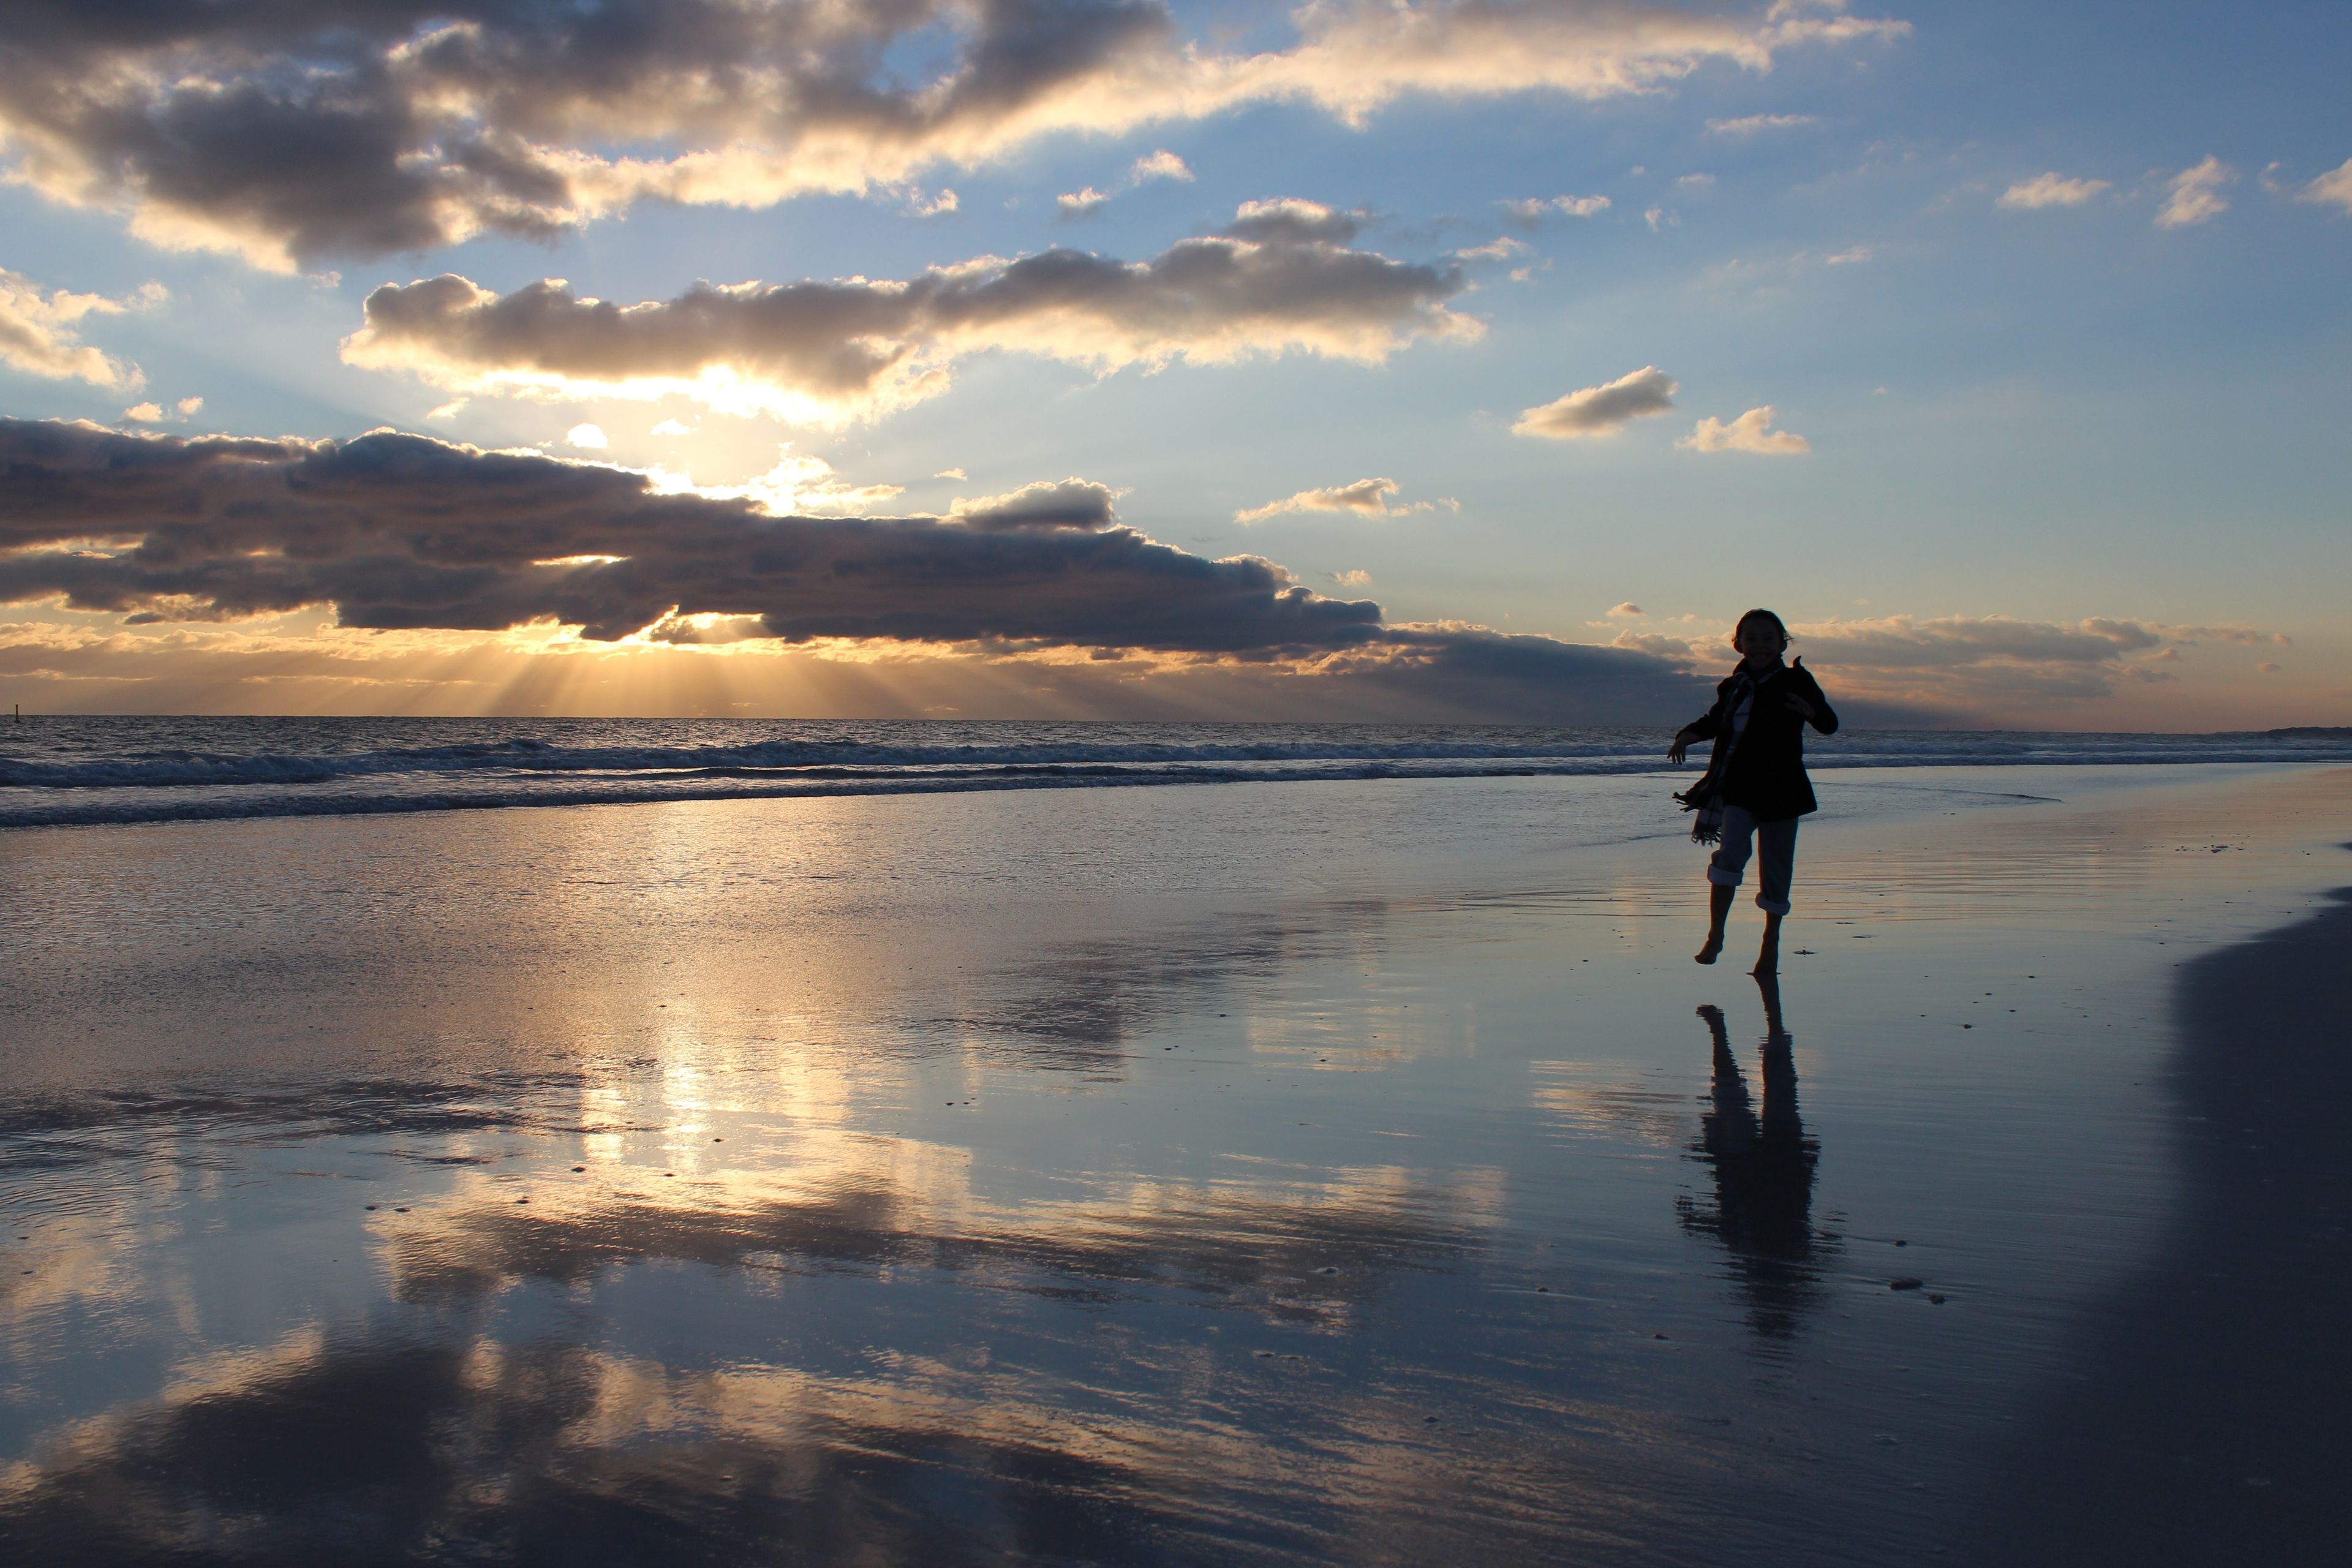 A silhouette of a woman walking on the shore with the sun setting behind her and reflecting on the water.